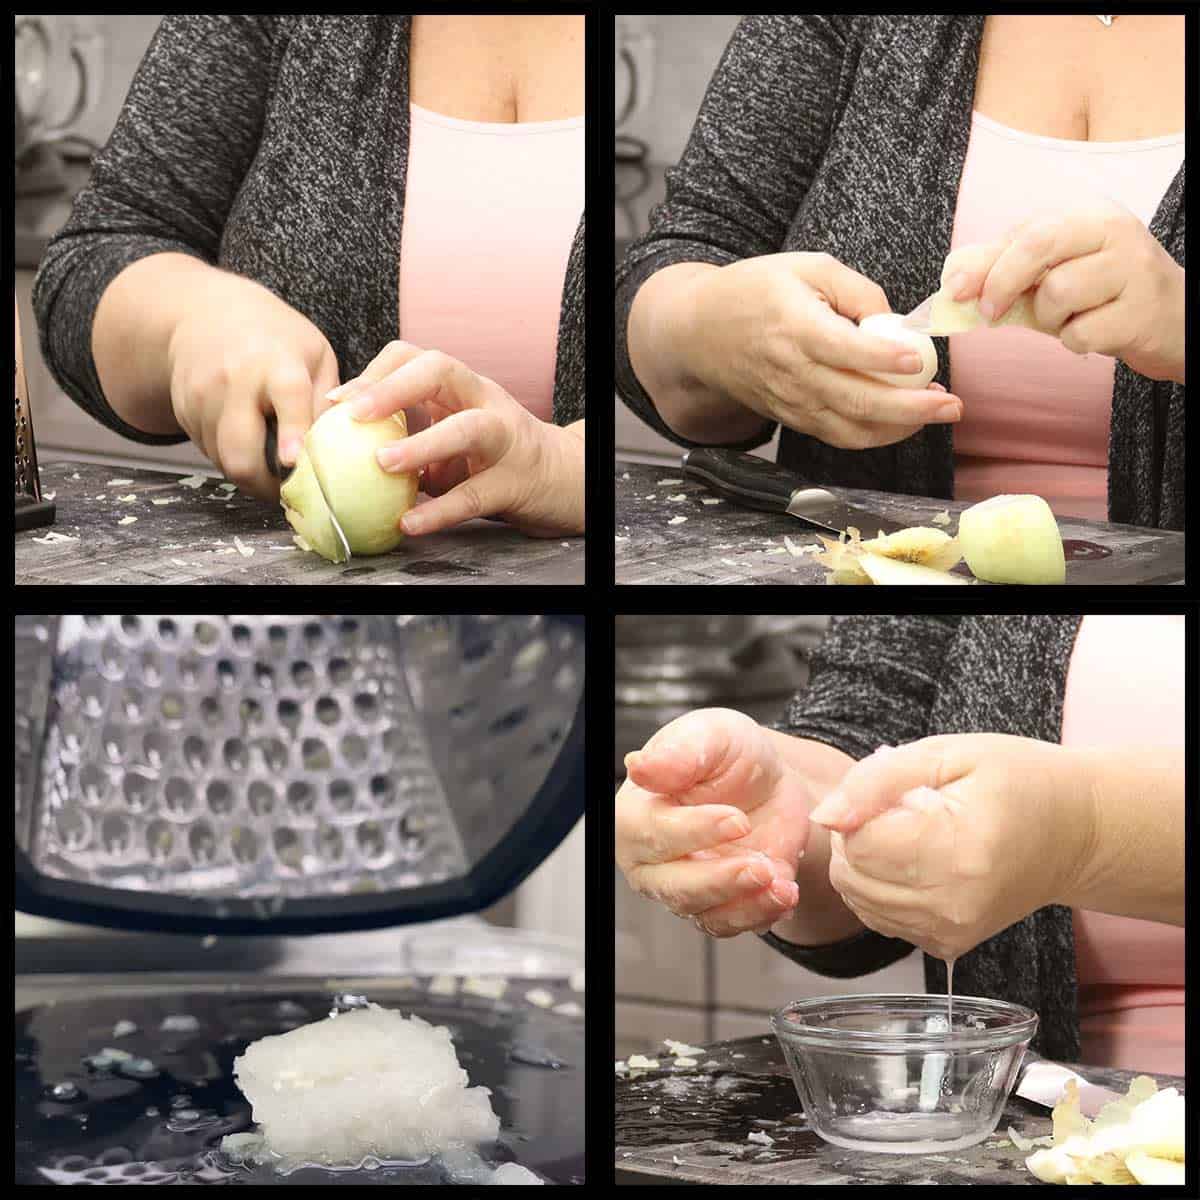 grating and squeezing the liquid from the onion.